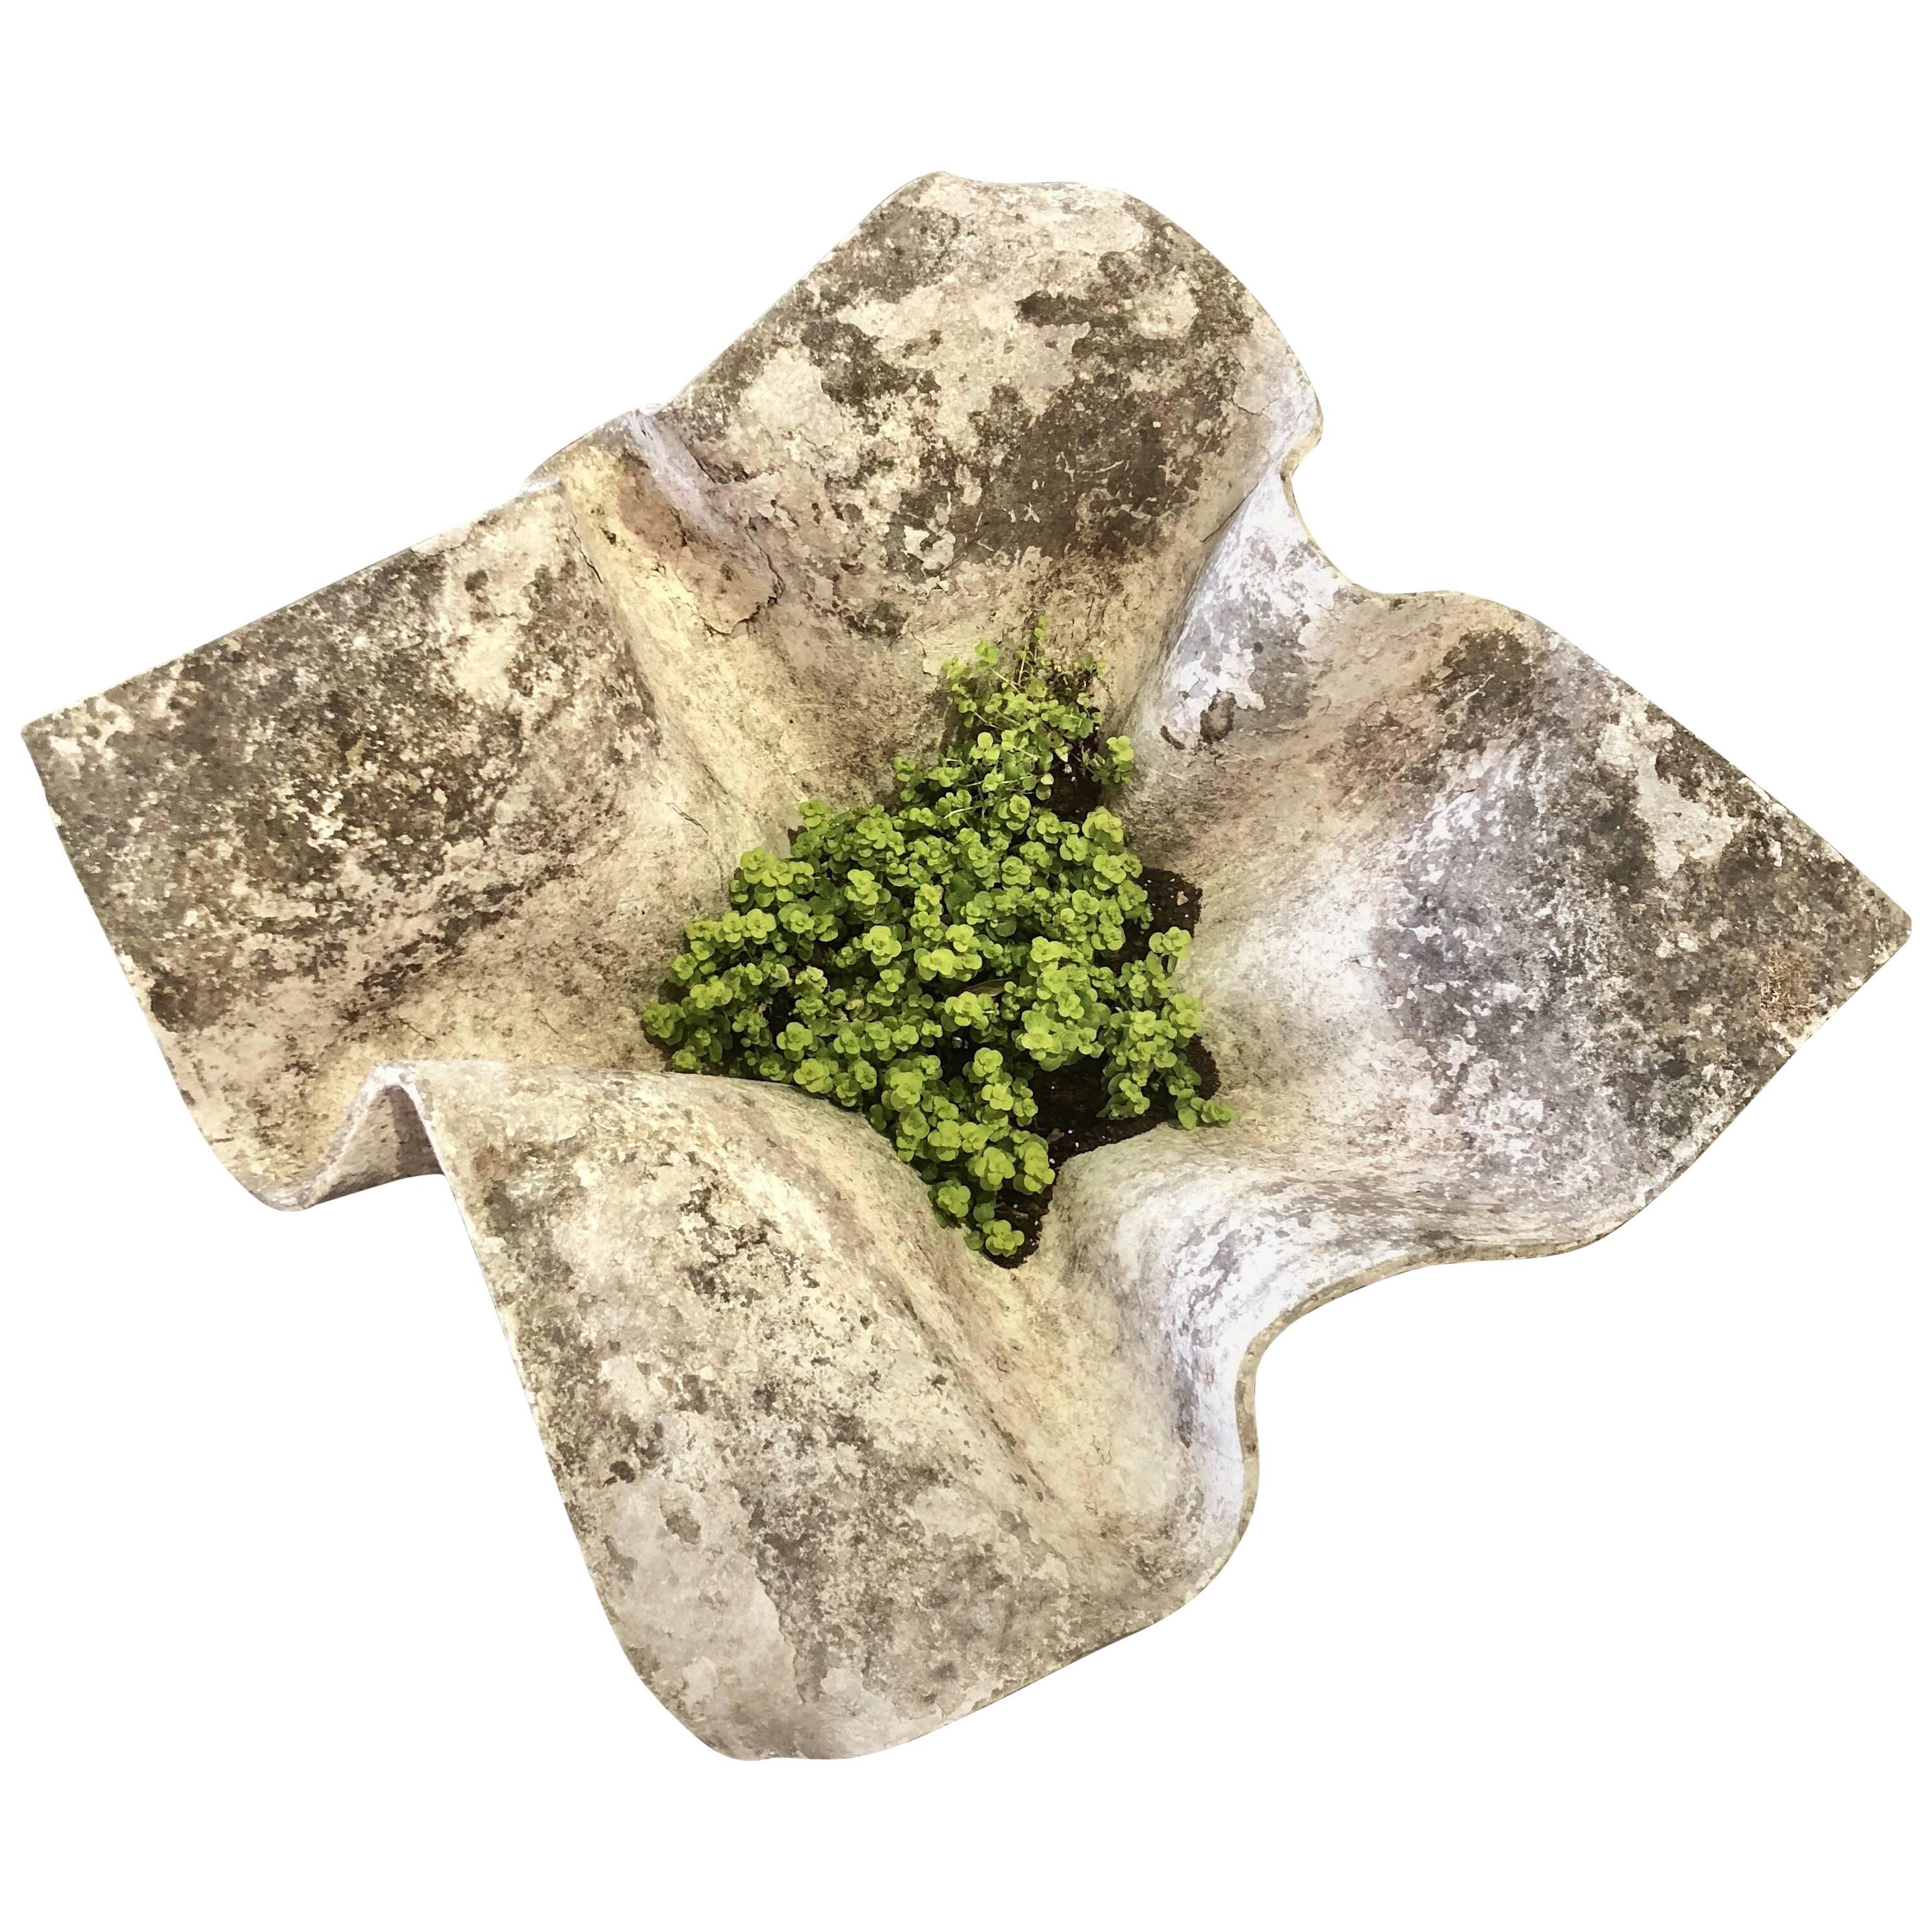 This fantastic large fiber concrete cast Willy Guhl handkerchief planter was found in France. This particular piece measures 48